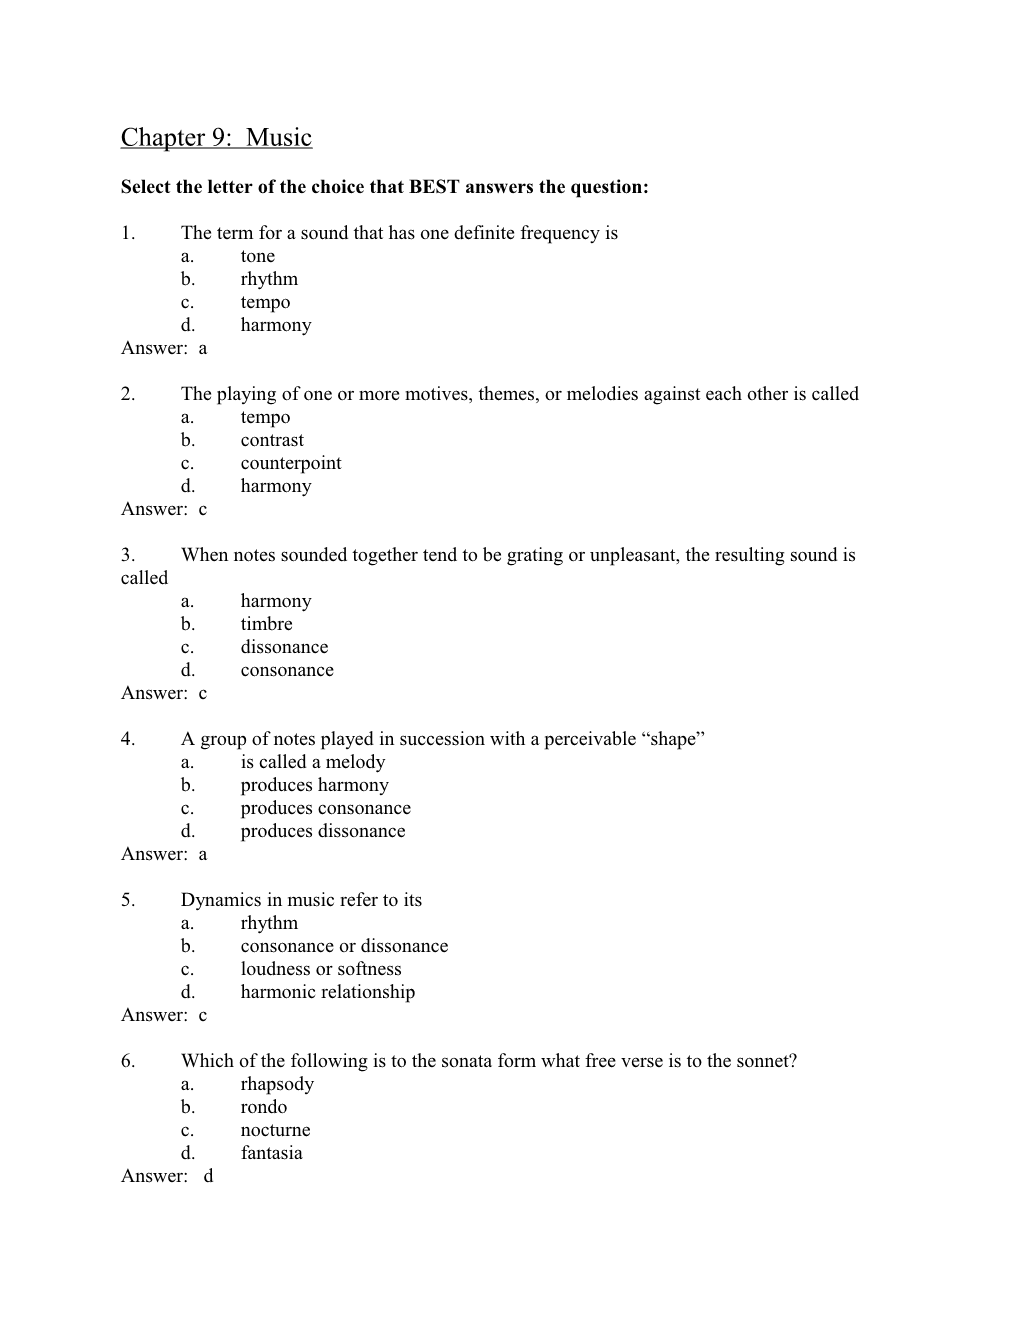 Chapter 9: Sample Test Questions